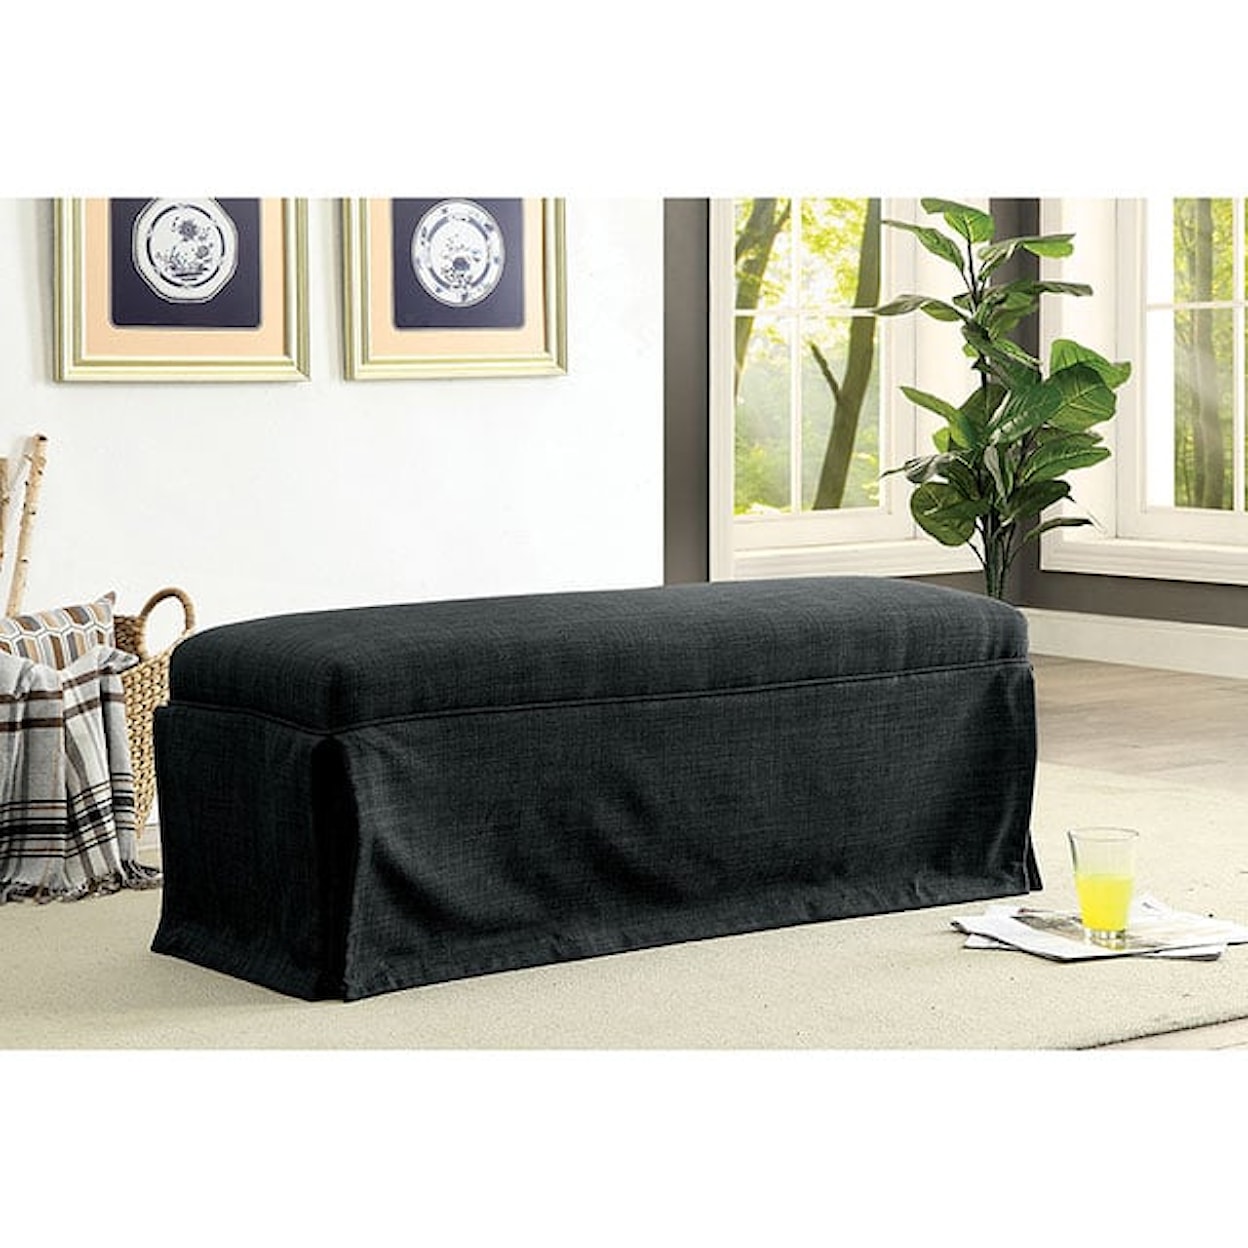 Furniture of America Kortrijk Skirted Bench with Welting Trim